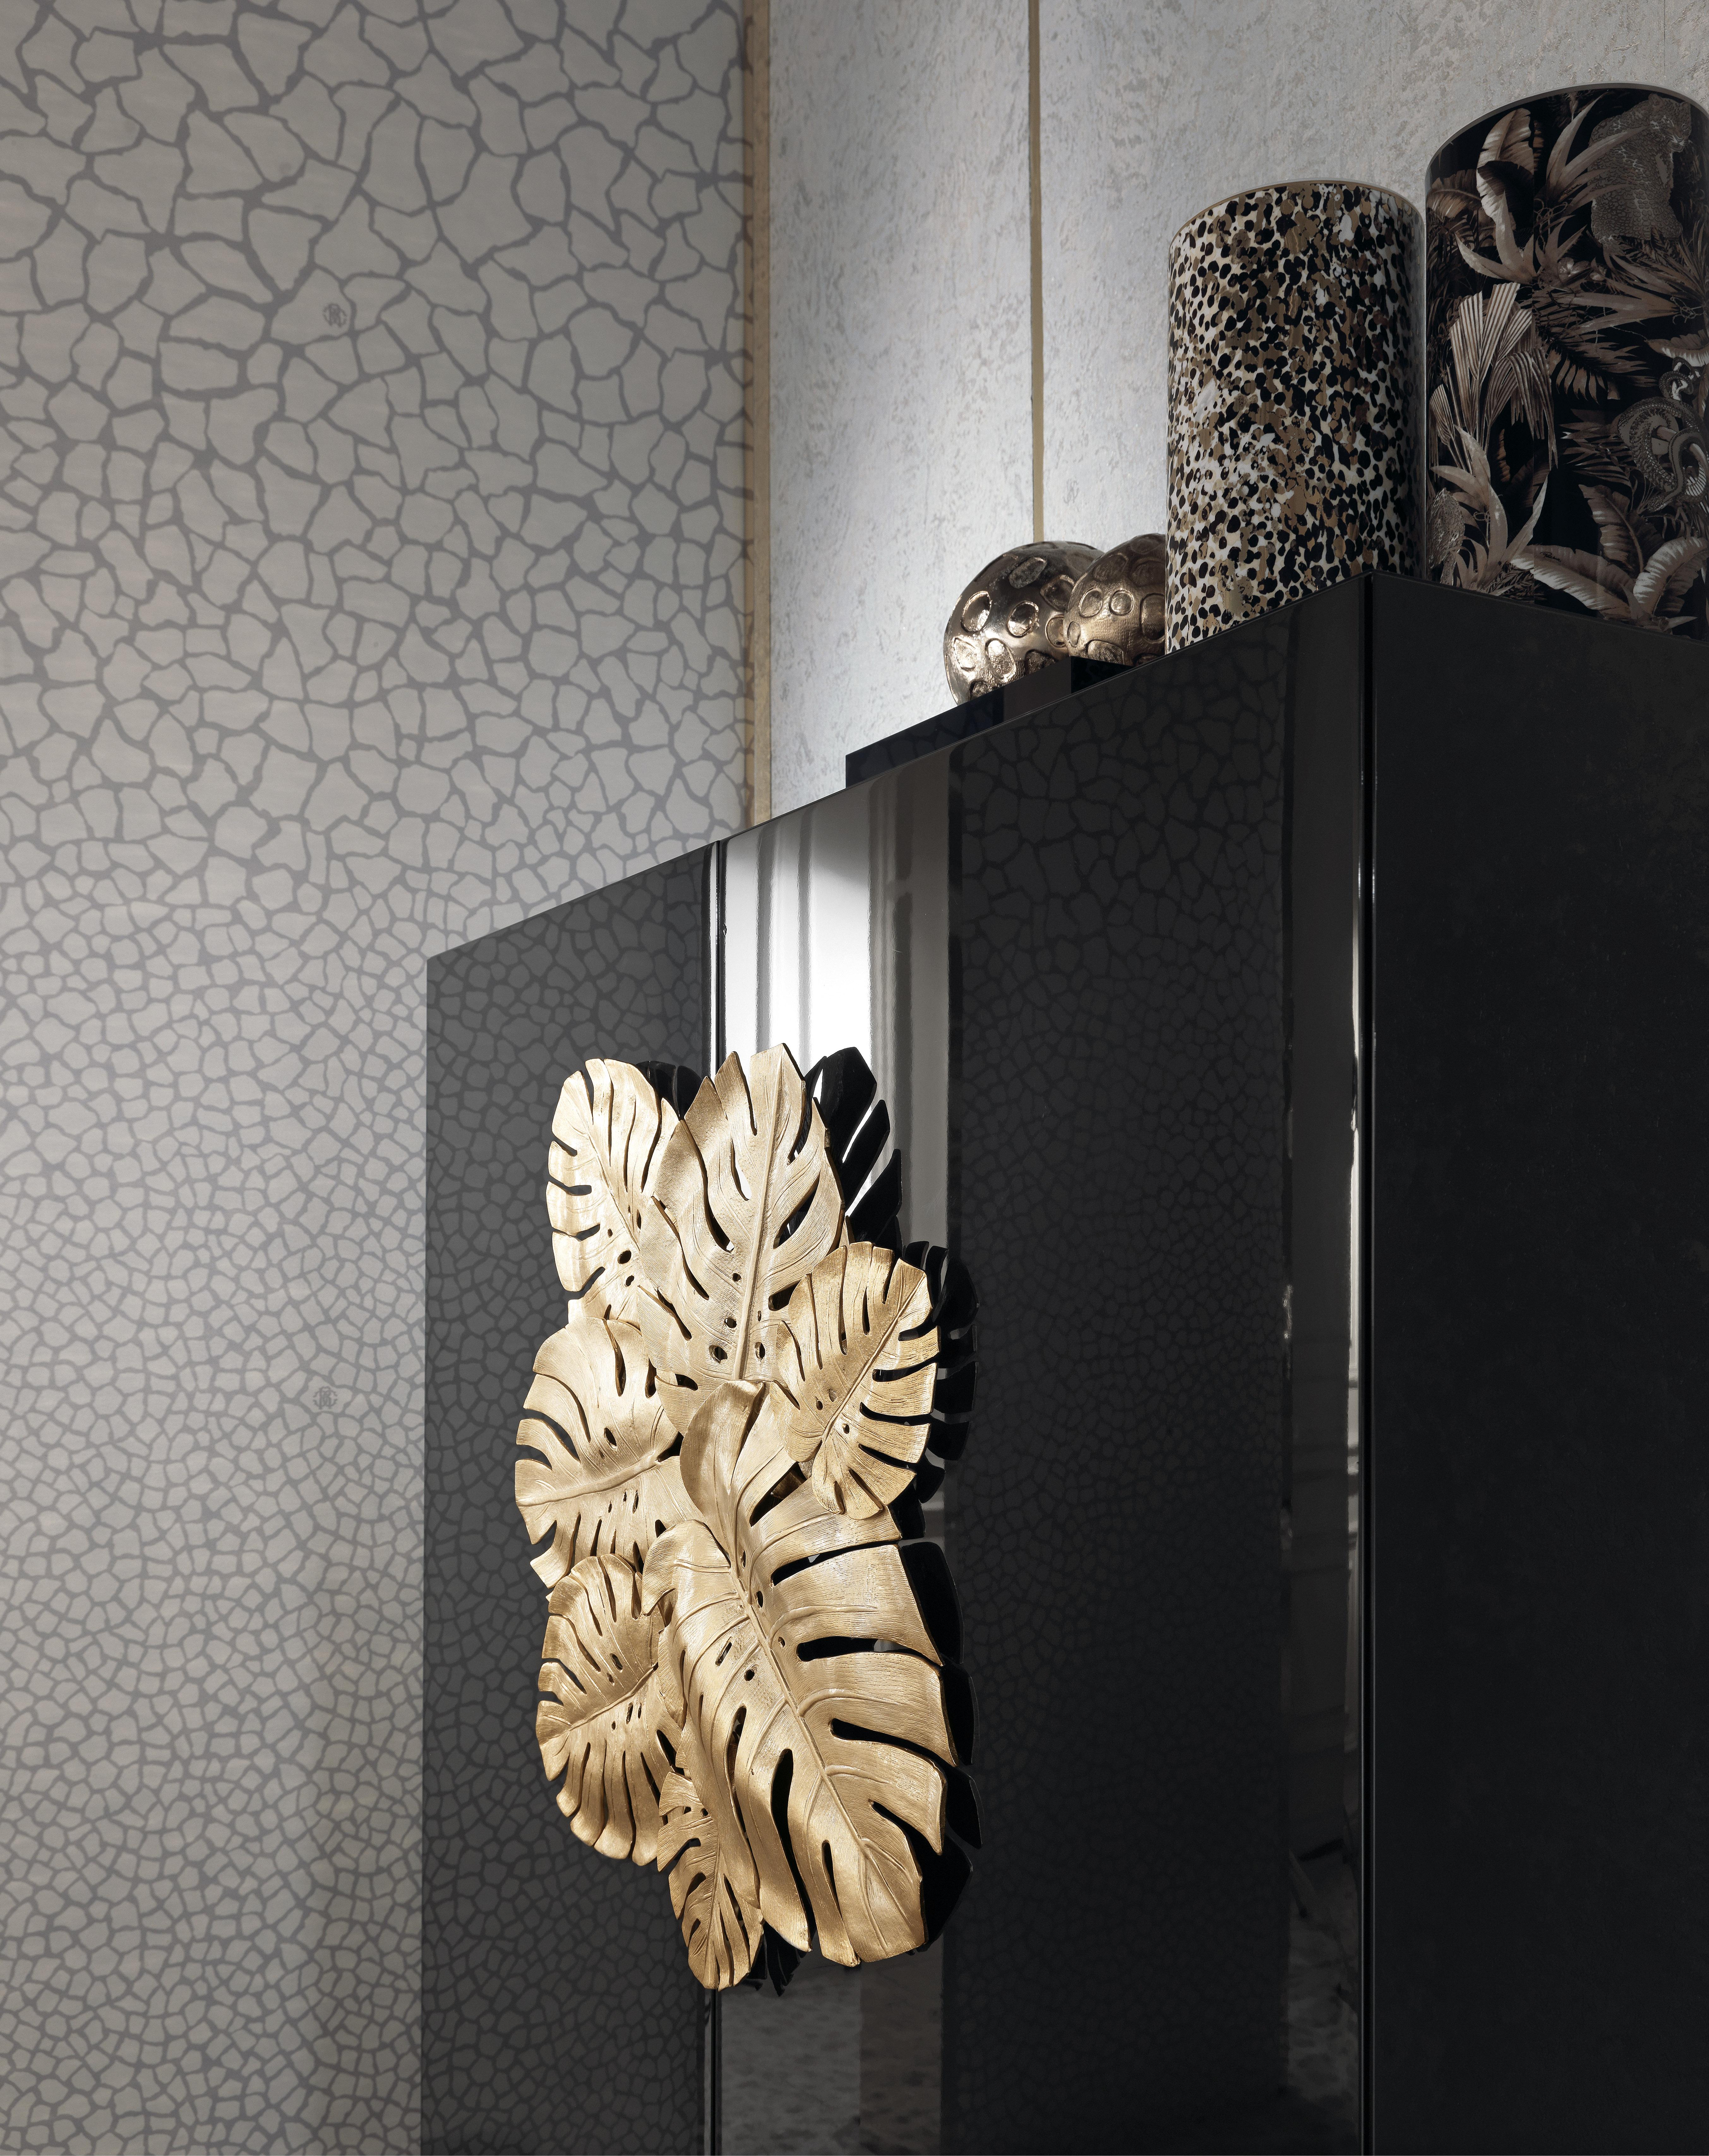 21st Century Azingo Bar Cabinet in Wood by Roberto Cavalli Home Interiors In New Condition For Sale In Cantù, Lombardia